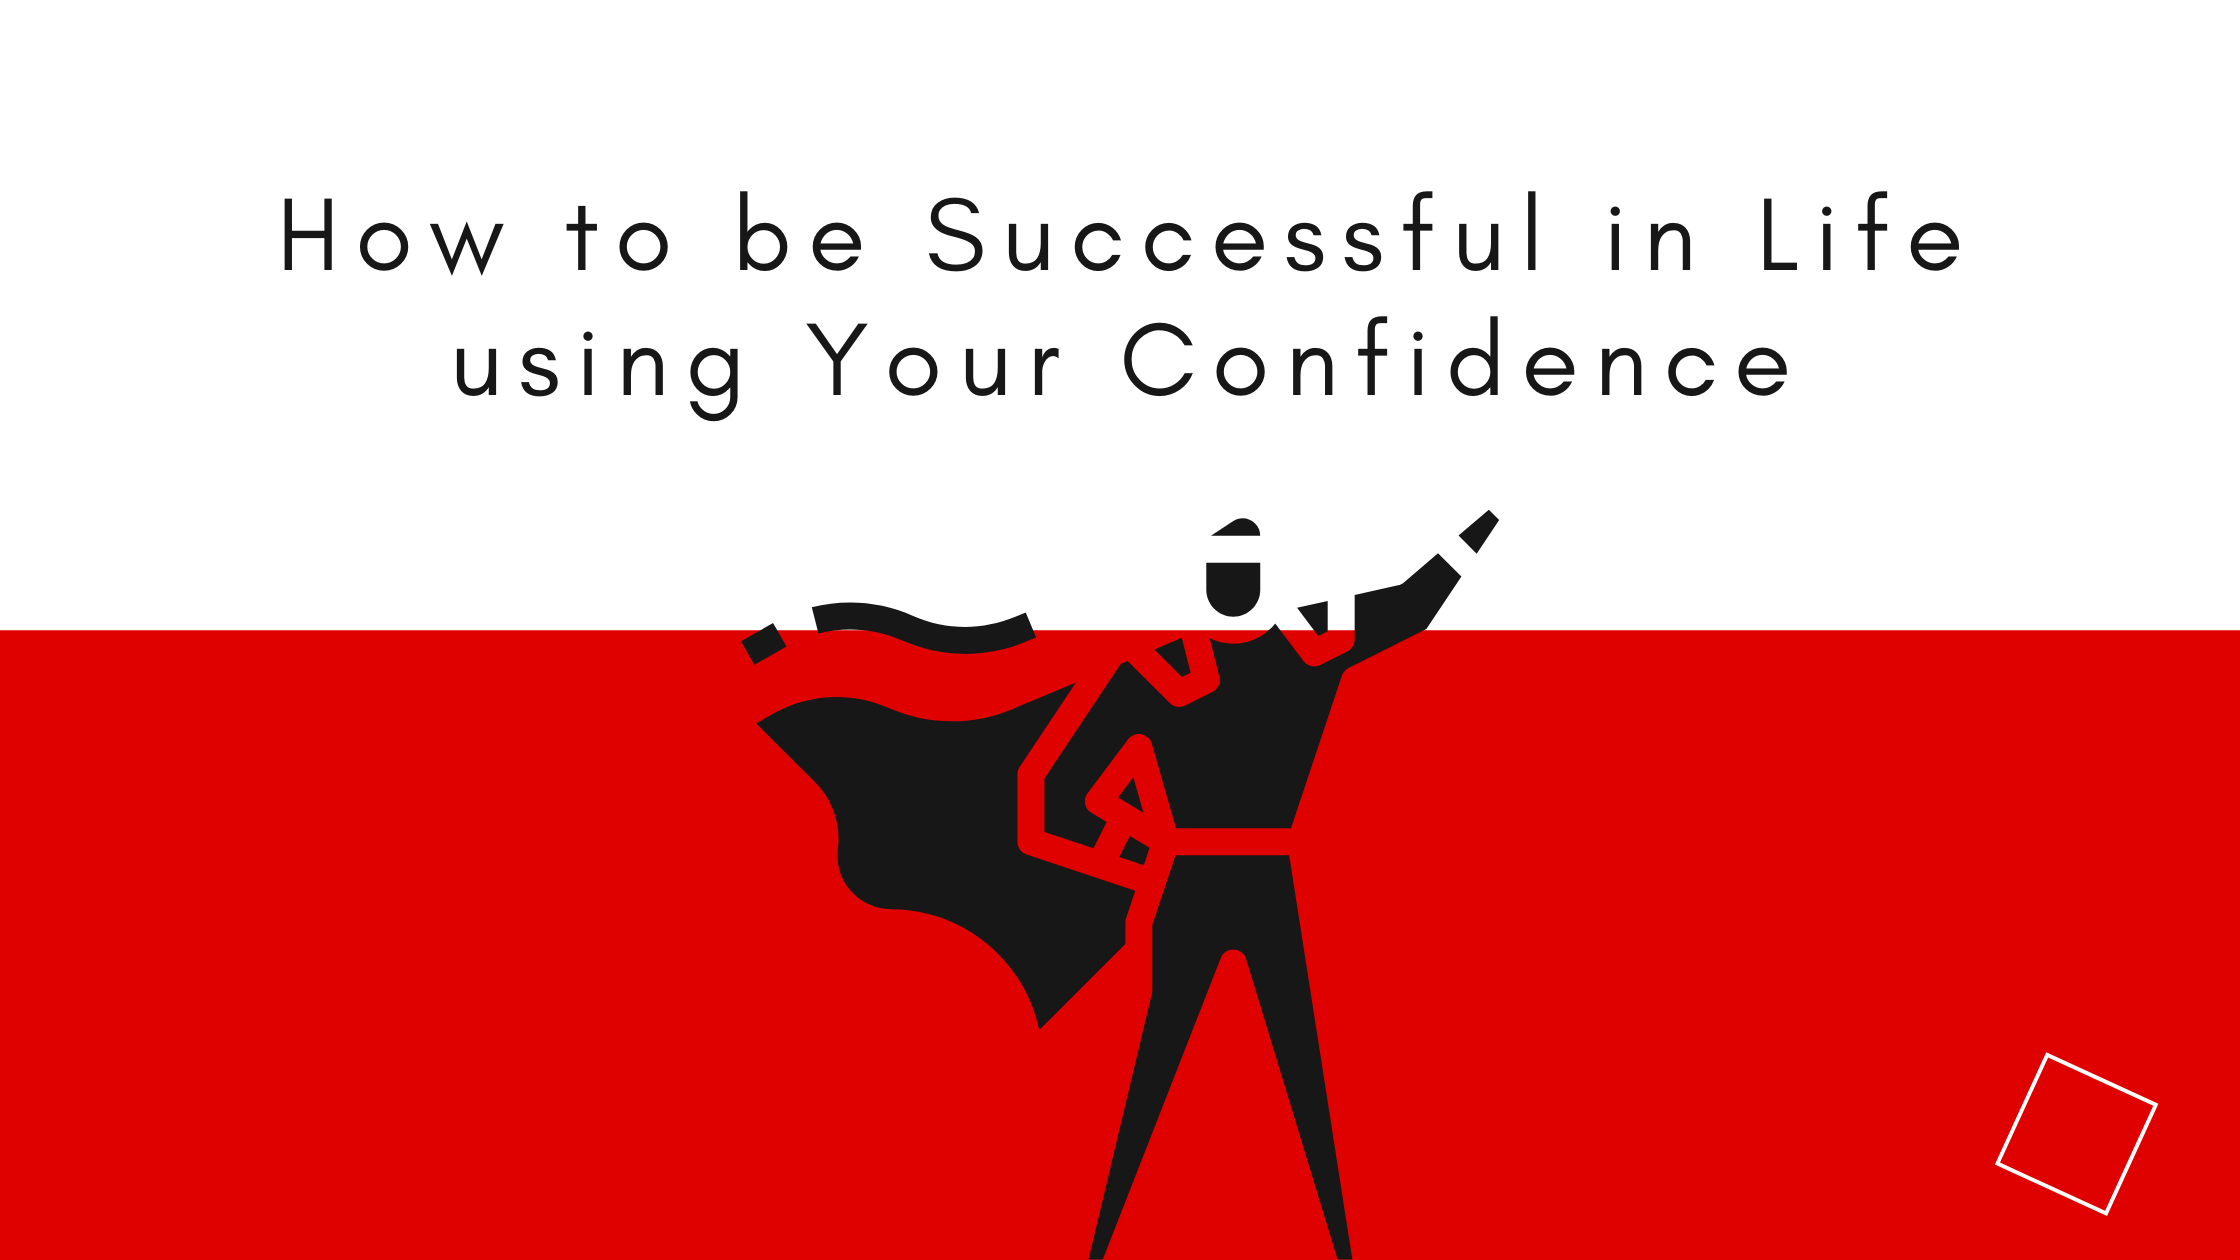 How to be successful in life using your confidence